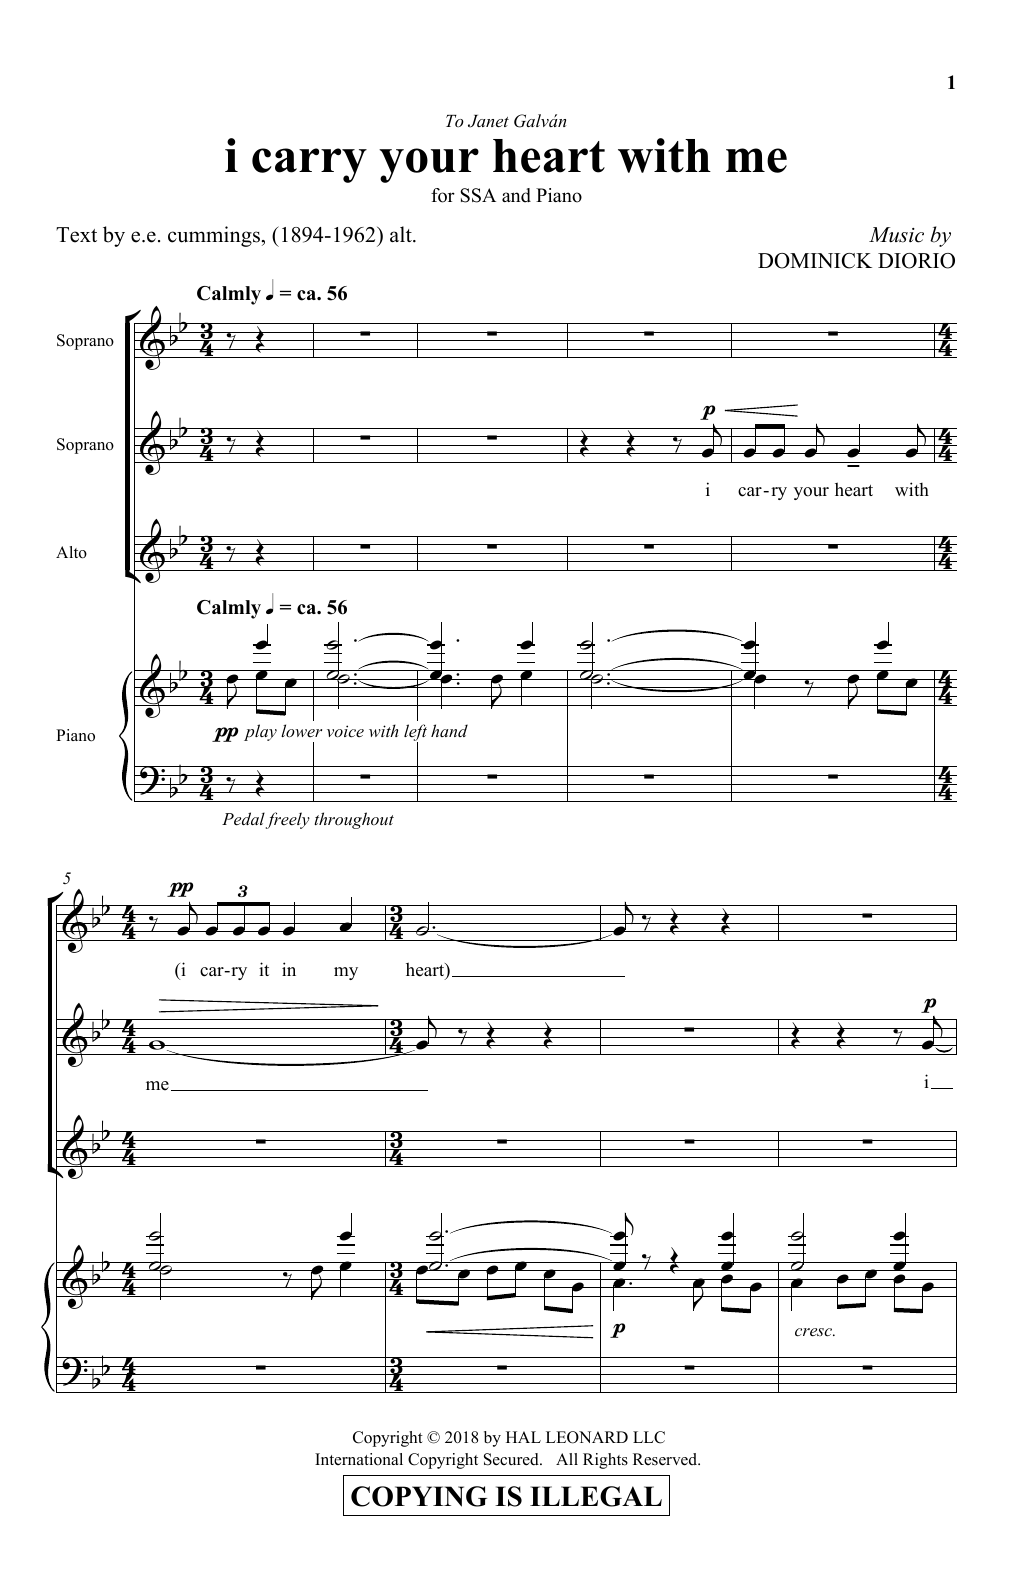 Download Dominick DiOrio I Carry Your Heart Sheet Music